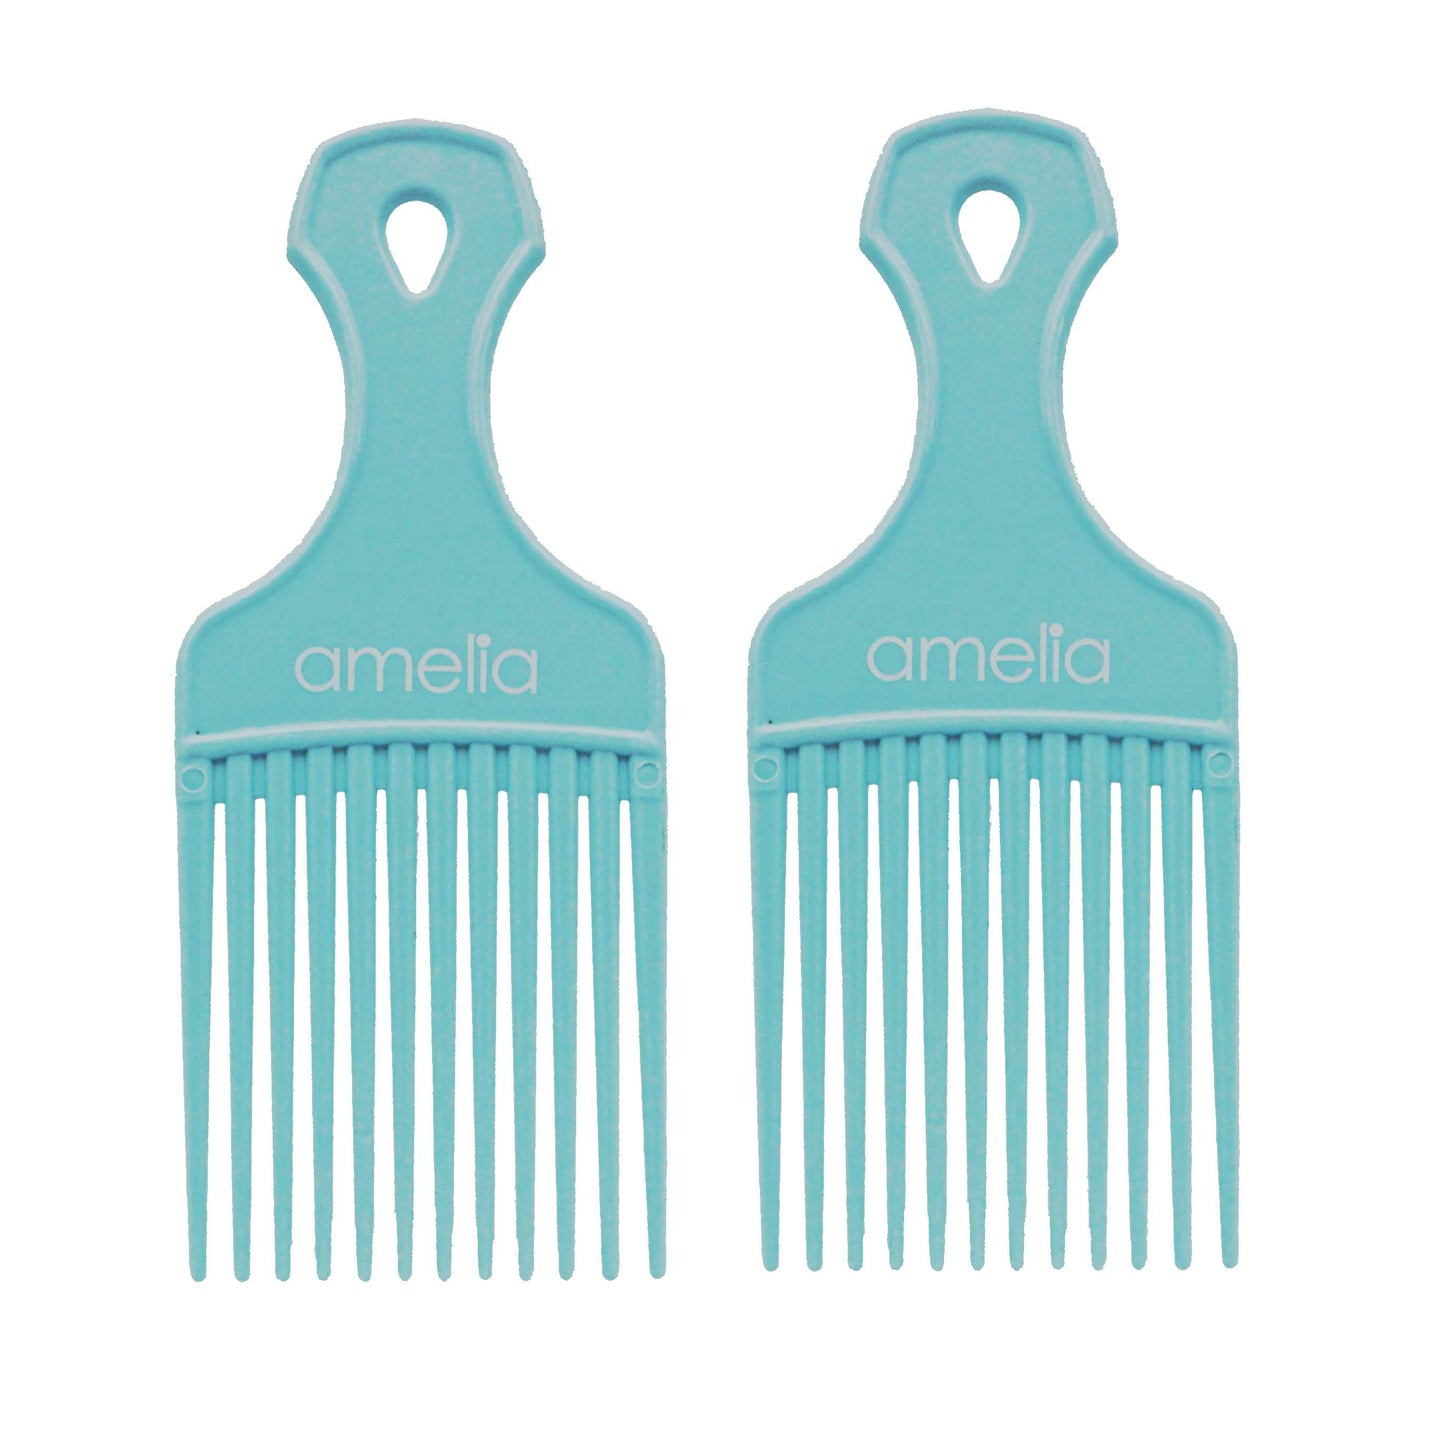 Amelia Beauty, 6in Sky Blue Curly Hair Wide Tooth Pick, Made in USA, Professional Grade Hair Pick Create Volume, Detangle, Portable Salon Barber Shop Afro Pick Comb Hair Styling Tool, 6"x2.5", 2 Pack